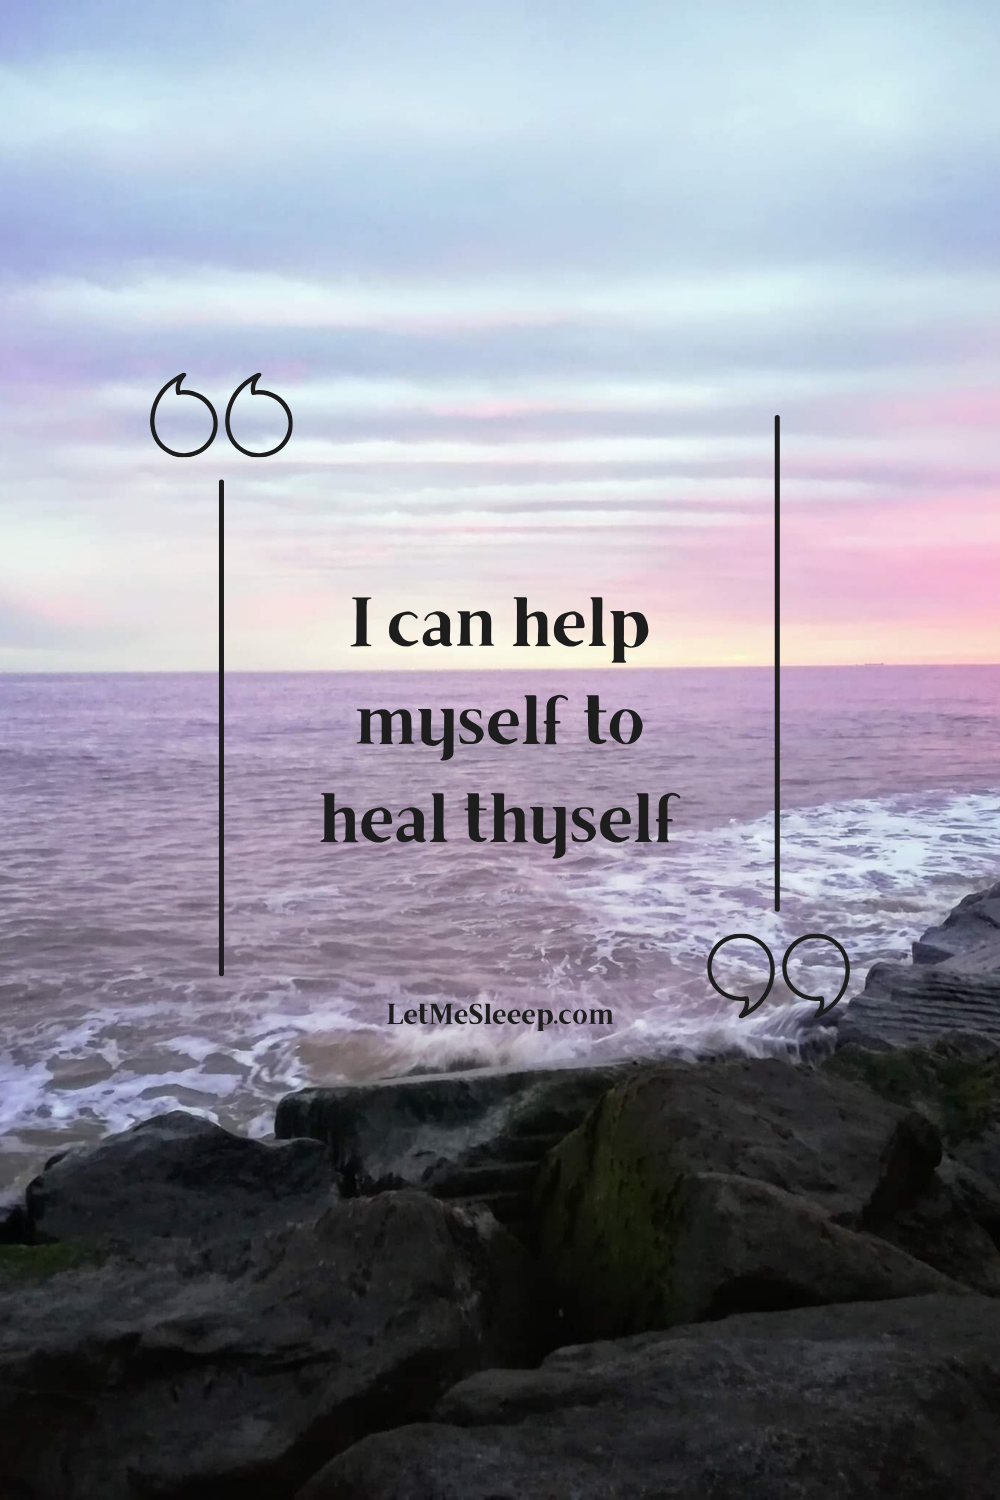 You have the power to heal yourself